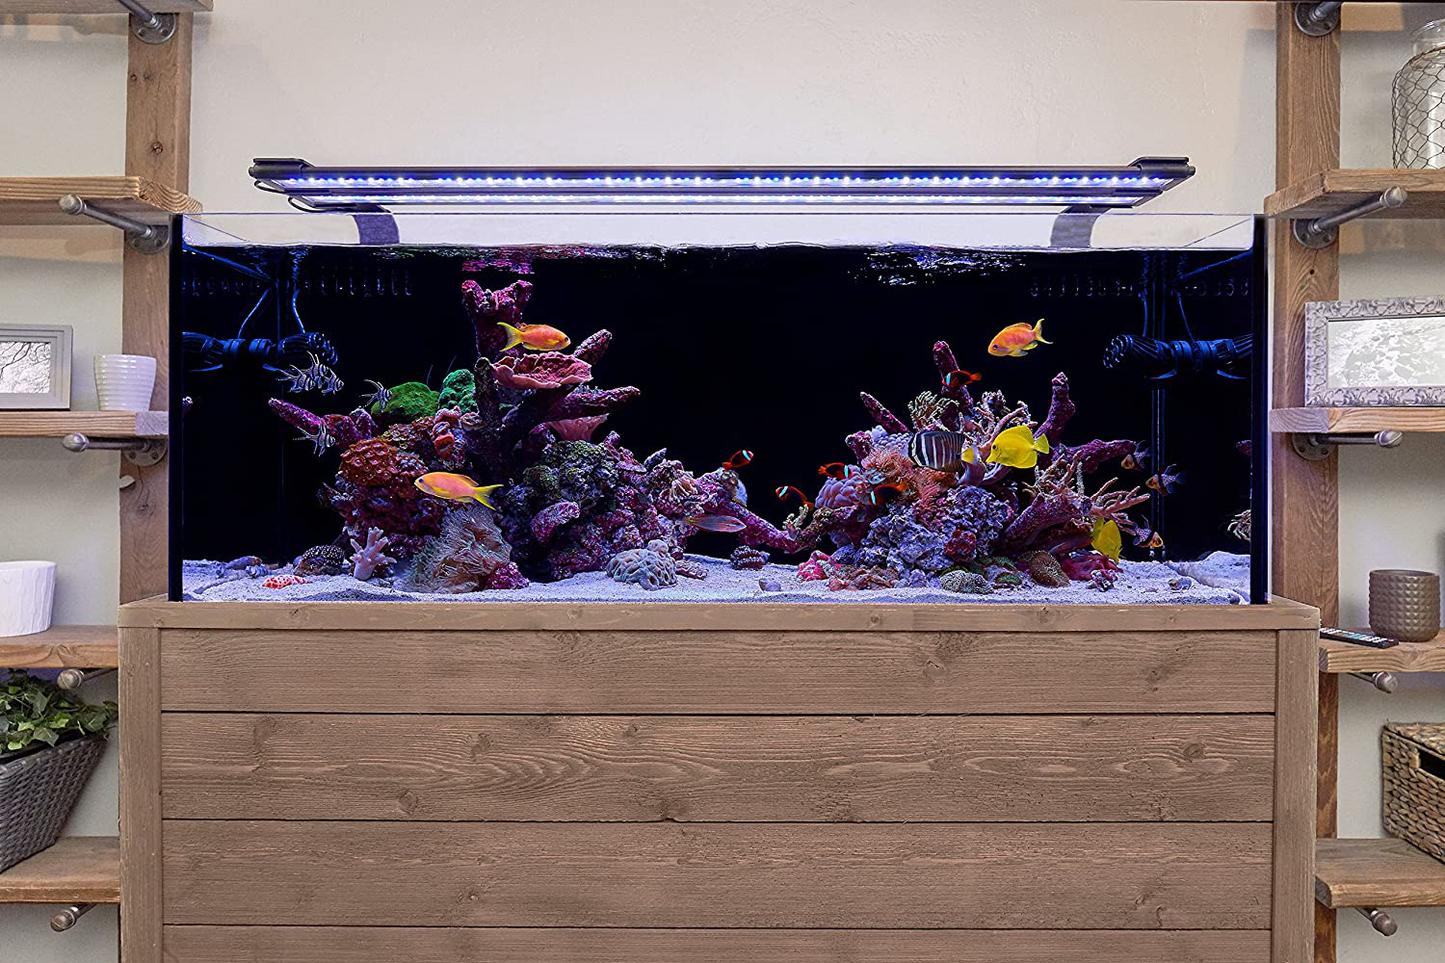 Current USA Orbit Marine LED Aquarium Light - Saltwater, Coral Reef Fish Tank - LOOP Wireless Lighting and Wave Pump Control with Timer - Adjustable Color Spectrum and Flow Mode - Sliding Docking Legs